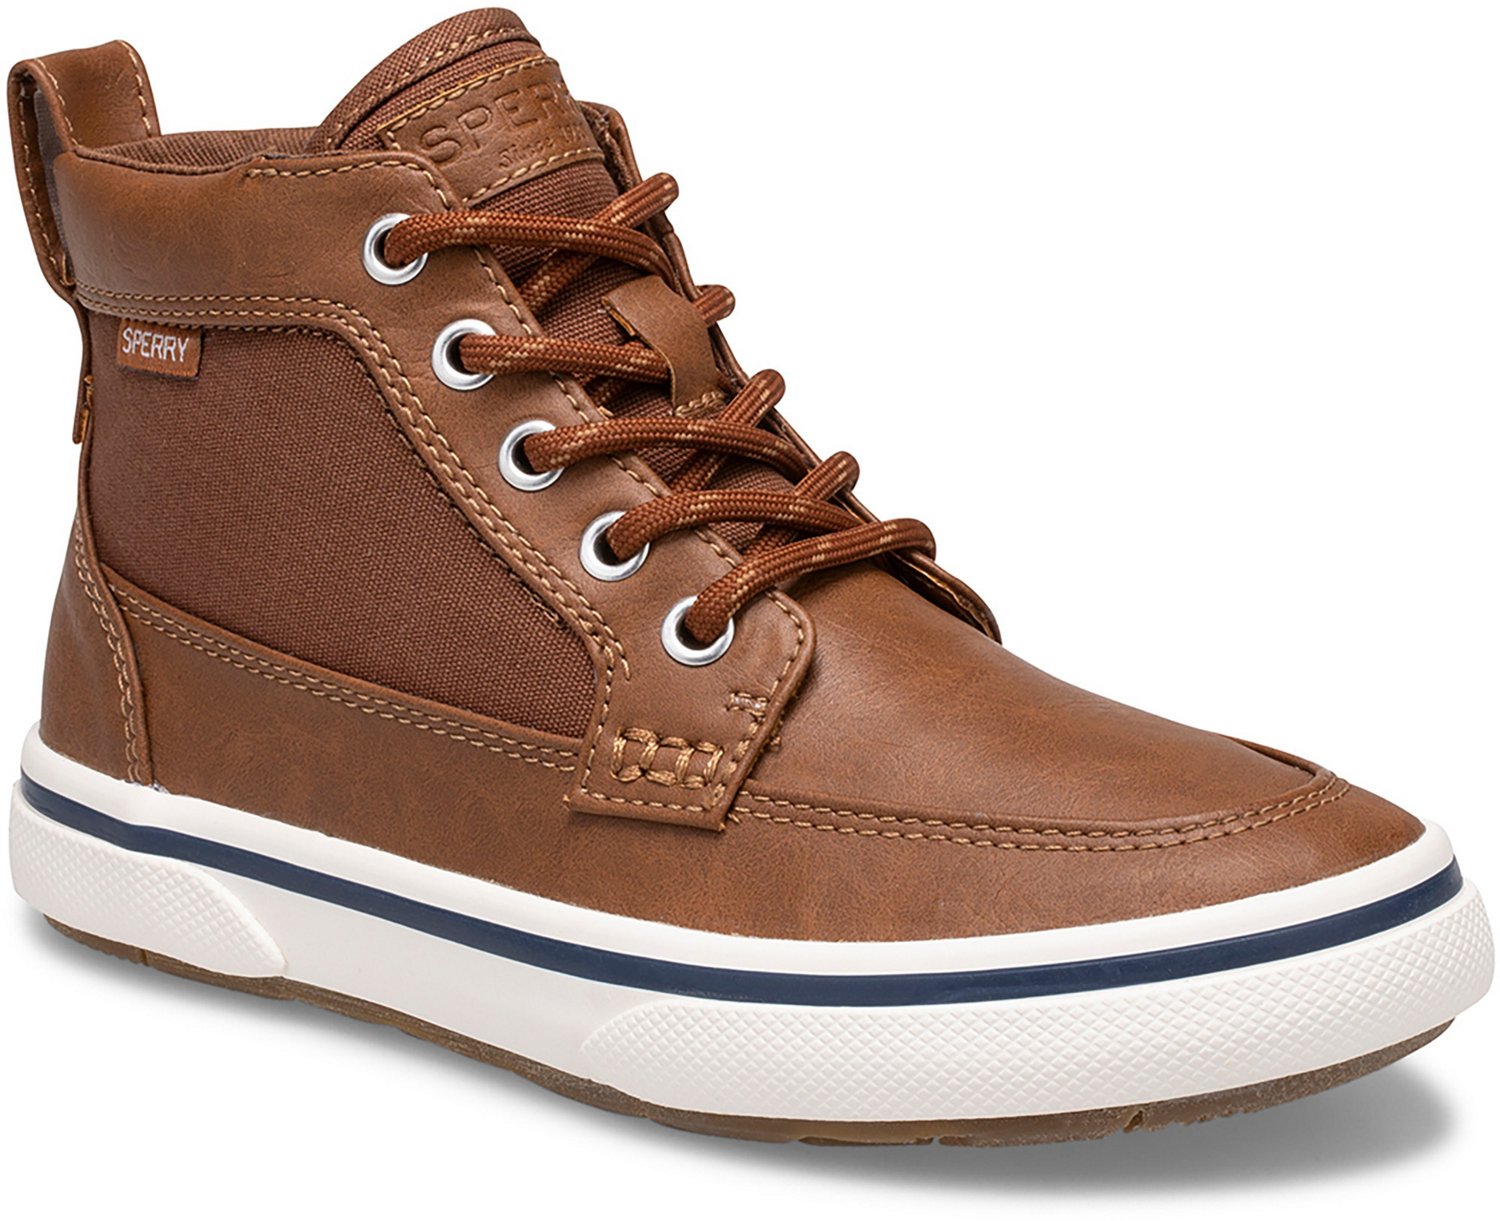 Sperry Boots | Academy